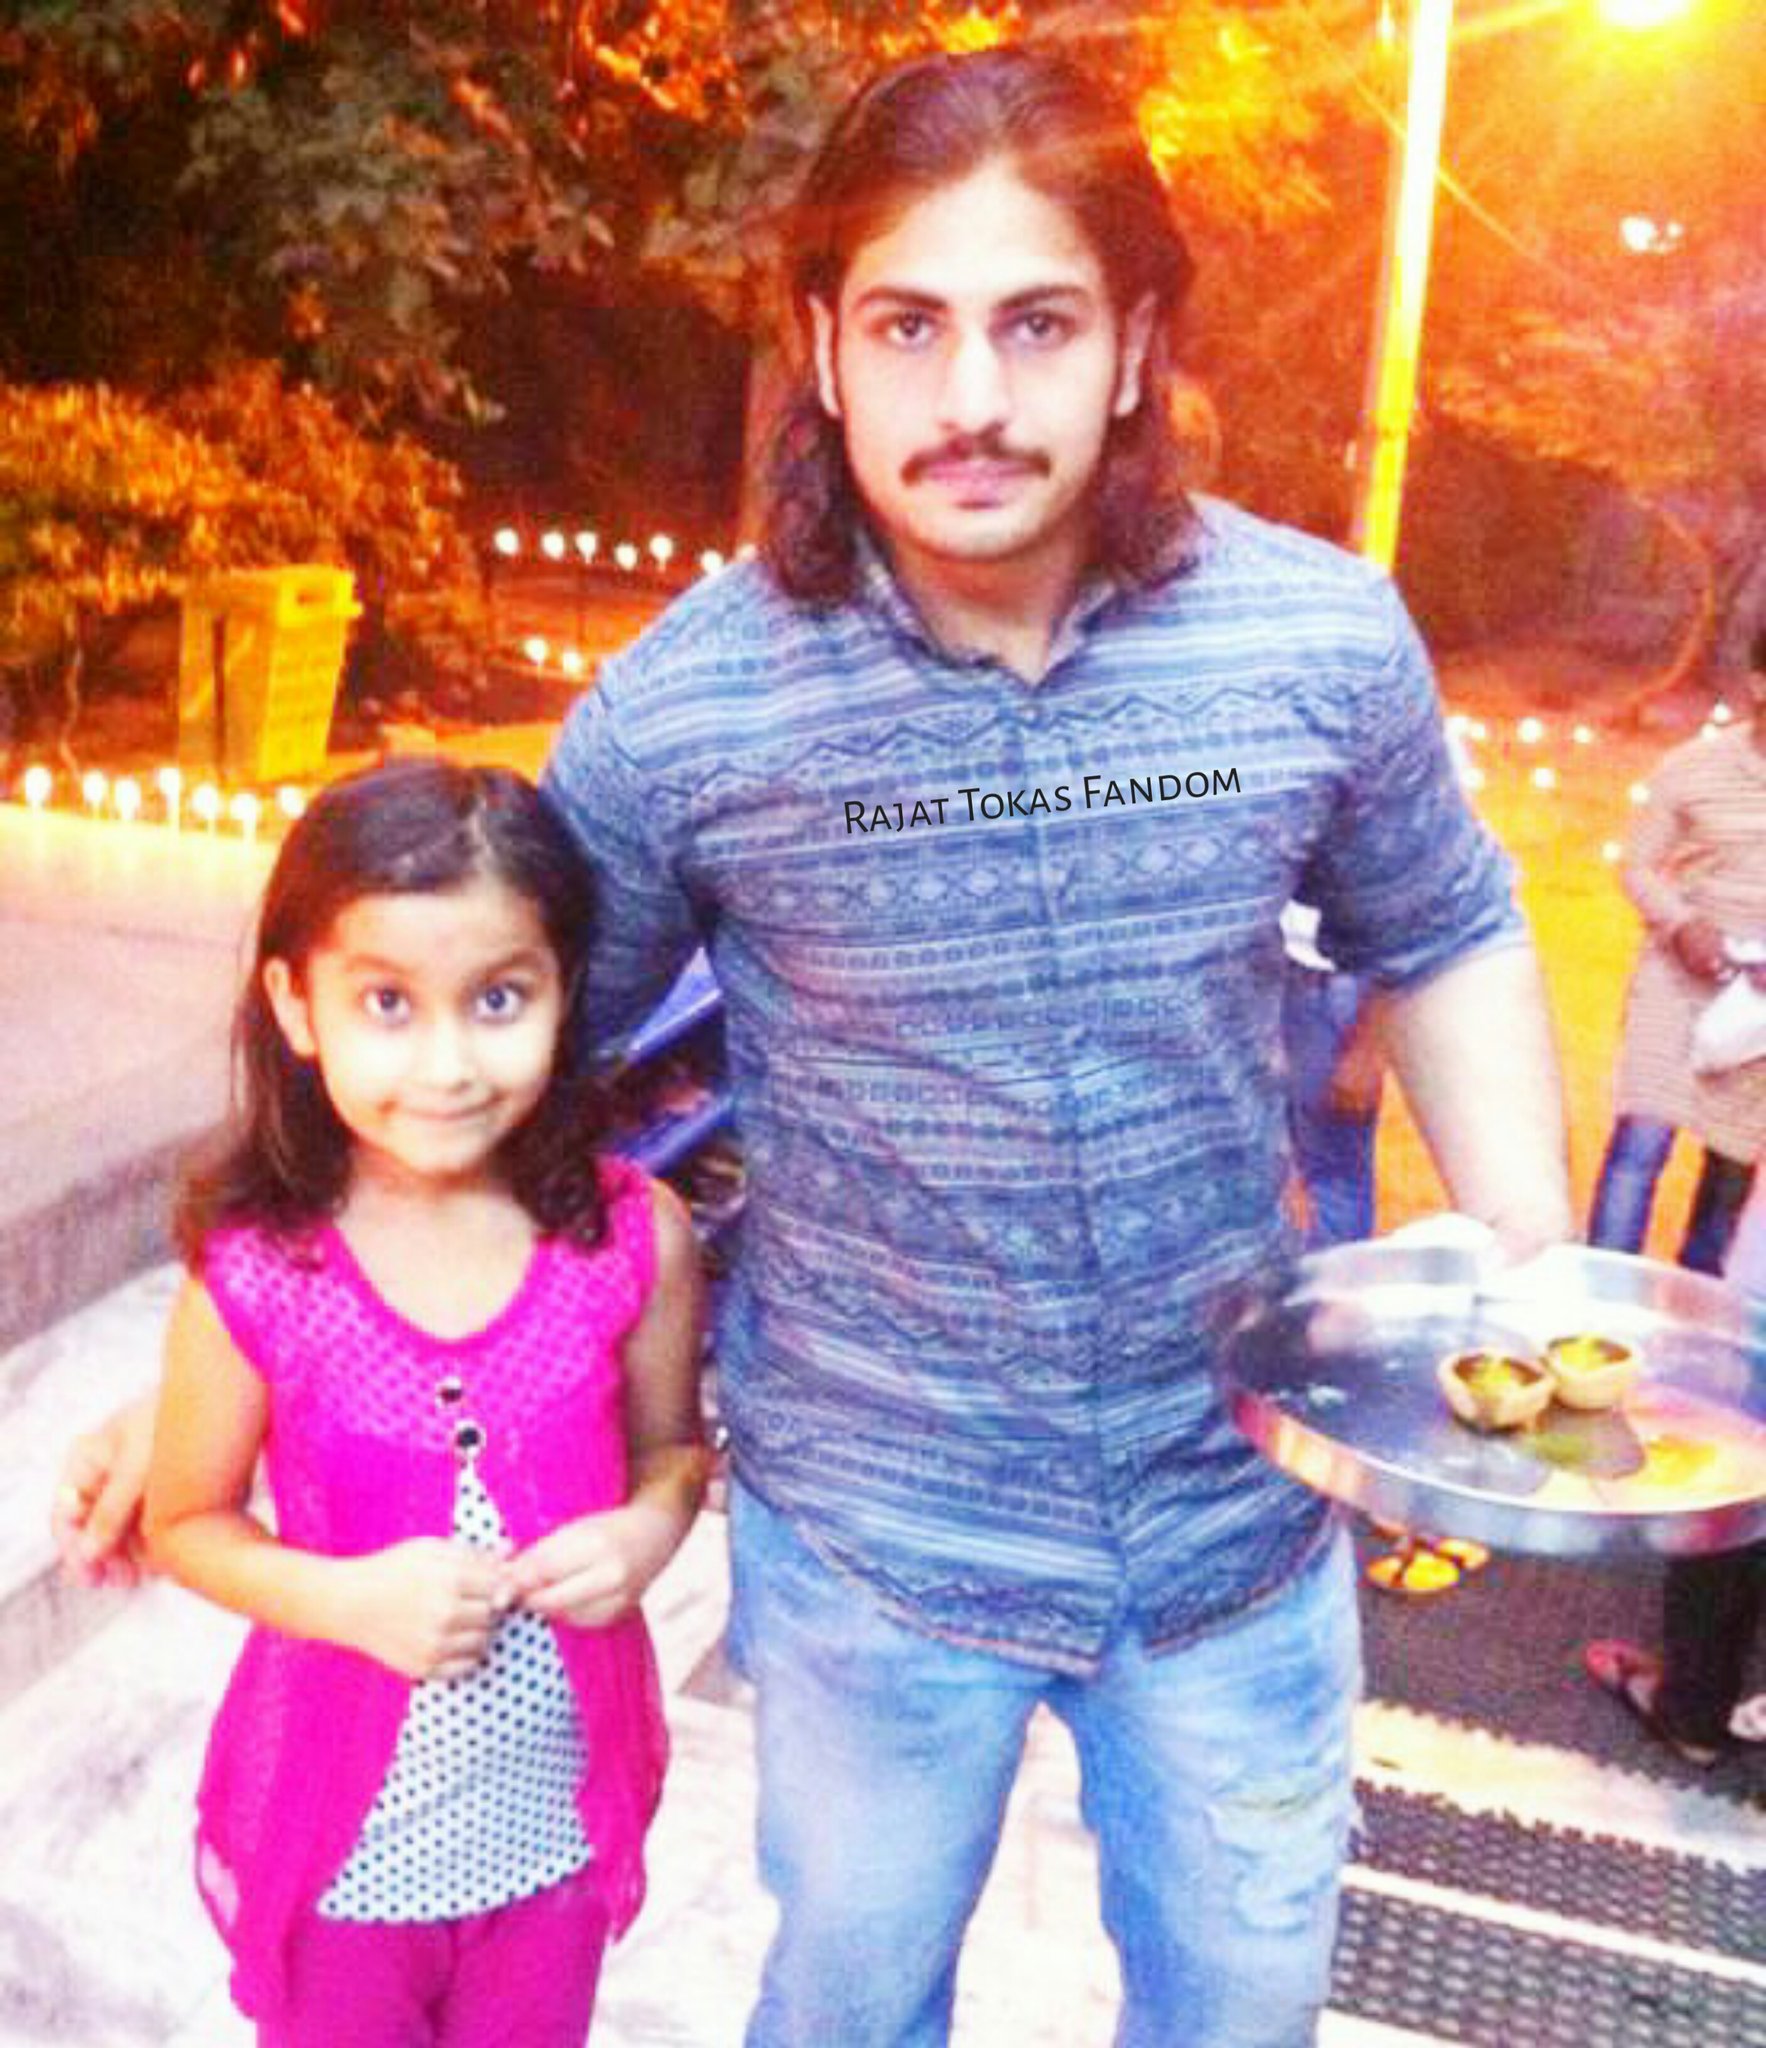 Rajat Tokas Fandom On Twitter Light Of Our Life Rajjattokas Offscreen Picture Of Our King During Diwali Celebration Cutie With Another Cutie Https T Co A92gznfhuo Check out rajat tokas (298351) image from rajat tokas photo gallery. rajat tokas fandom on twitter light